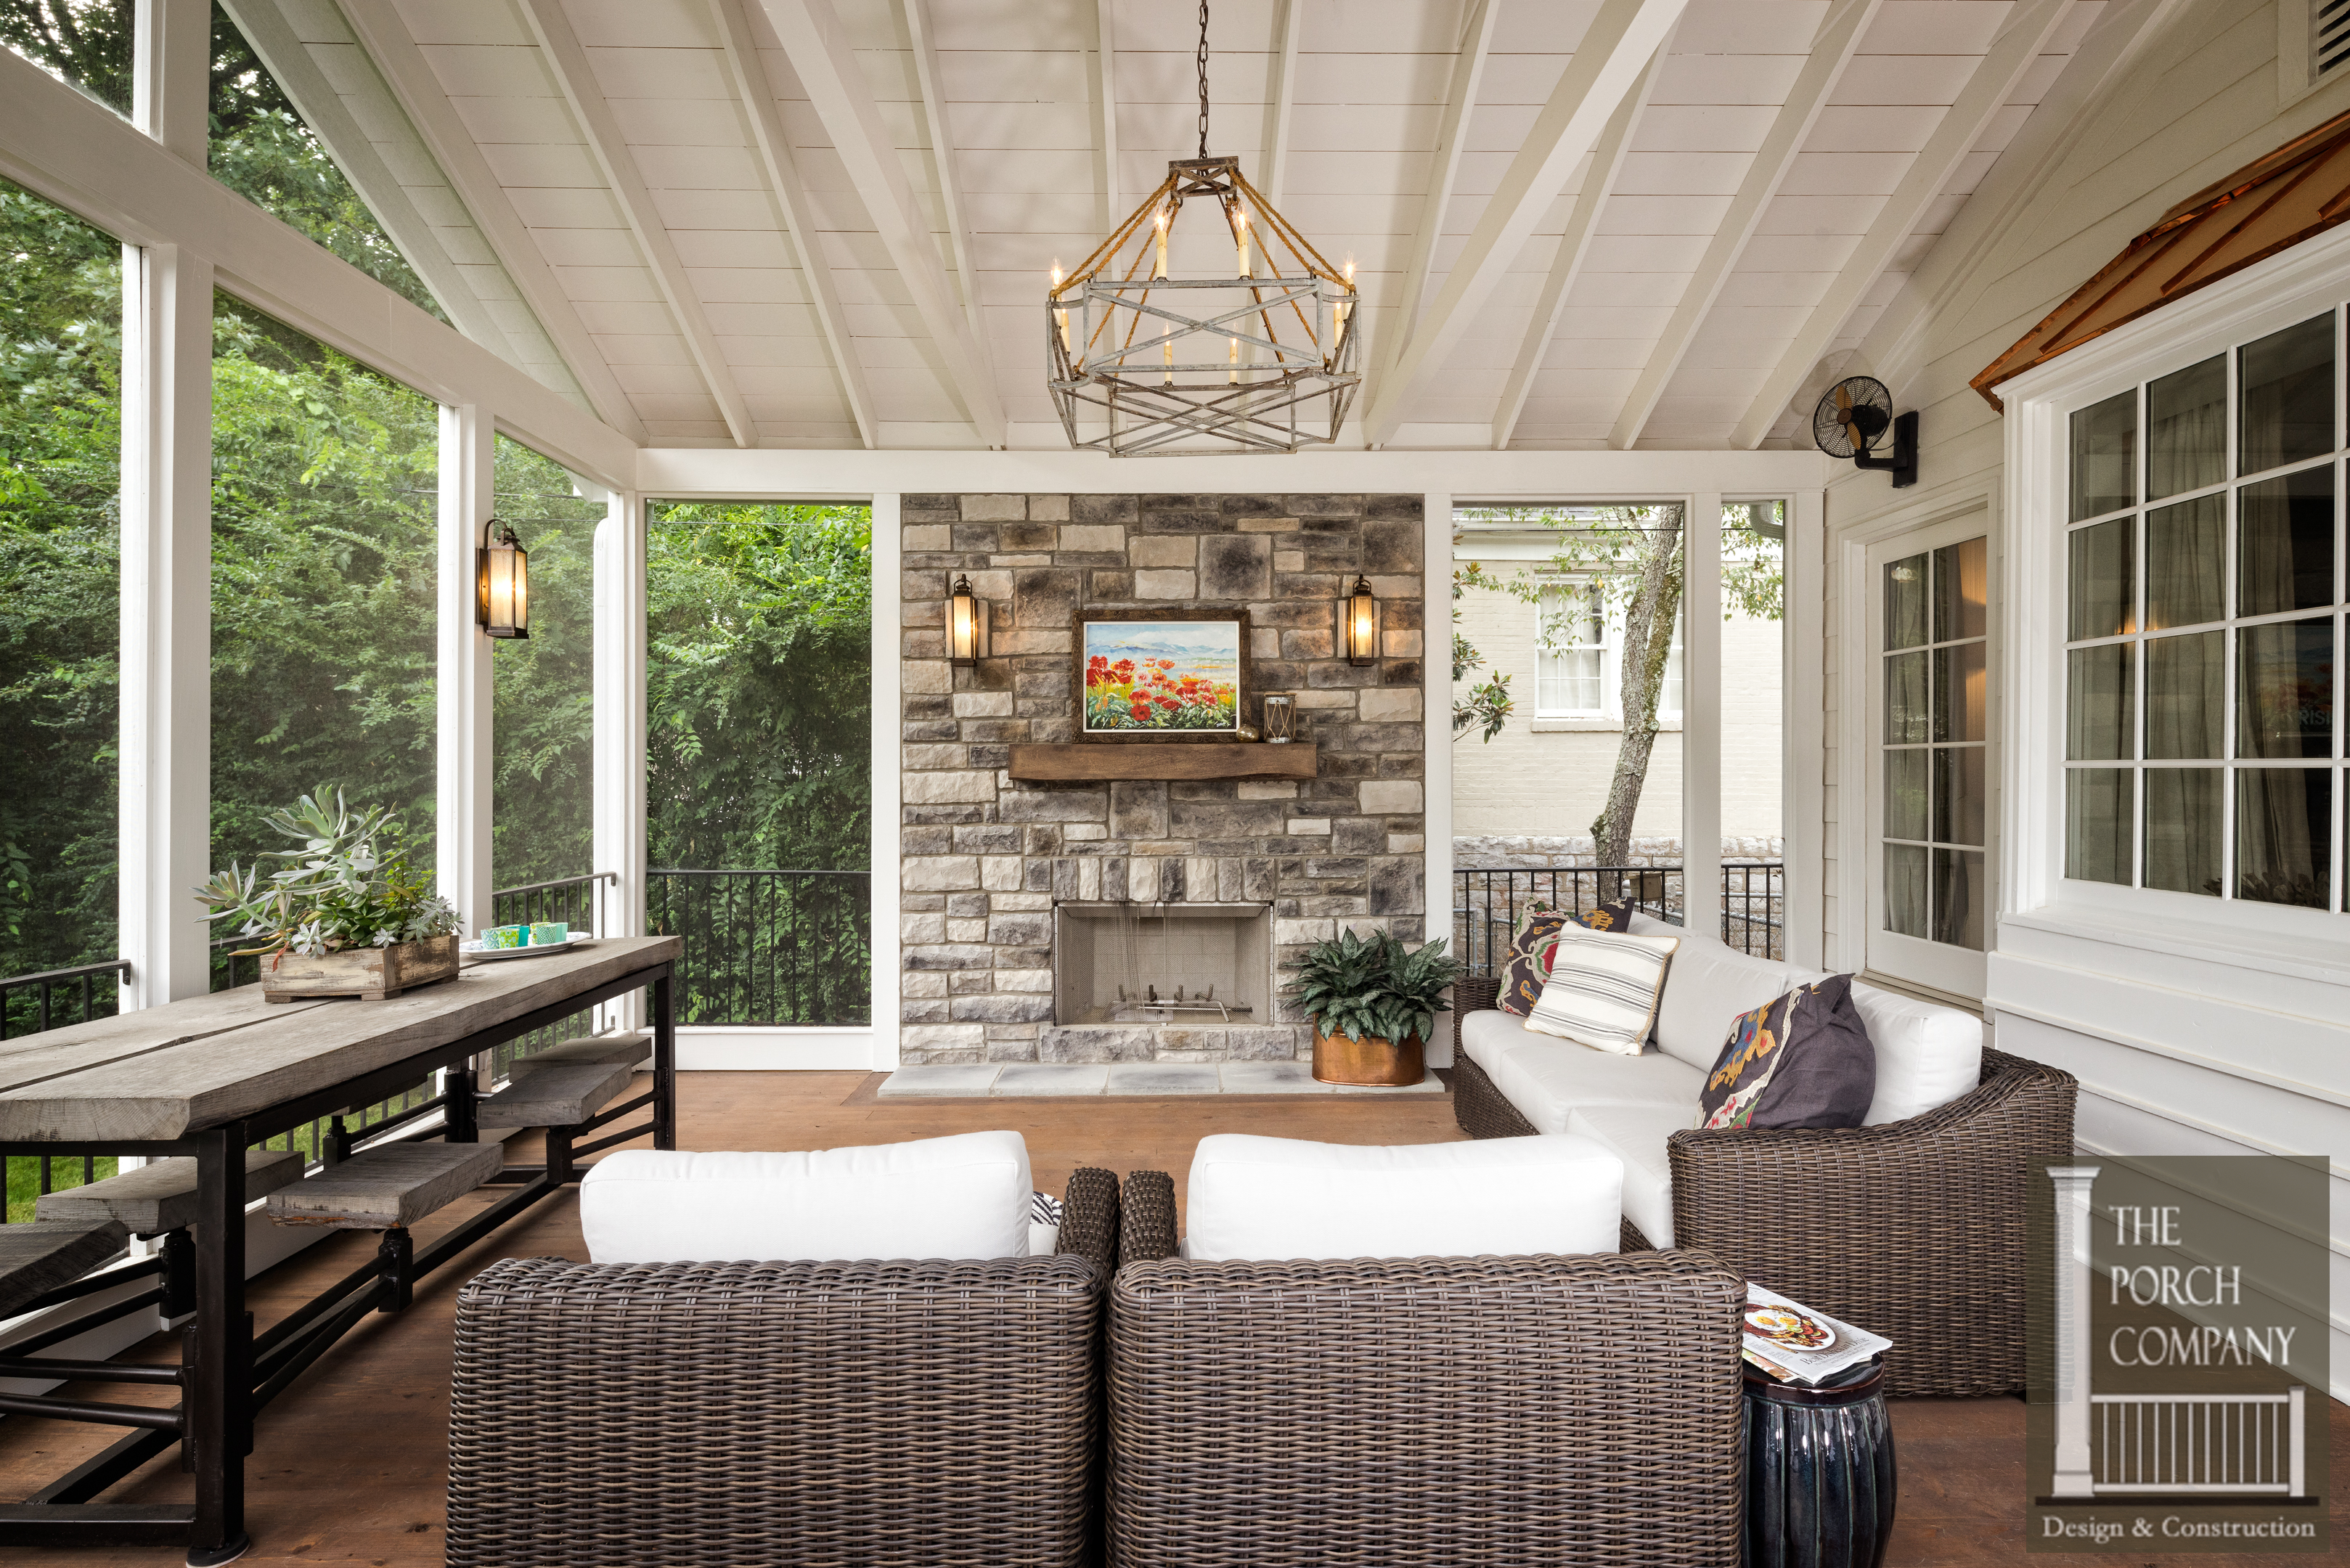 Screened Porch and Garage Oasis - The Porch CompanyThe Porch Company